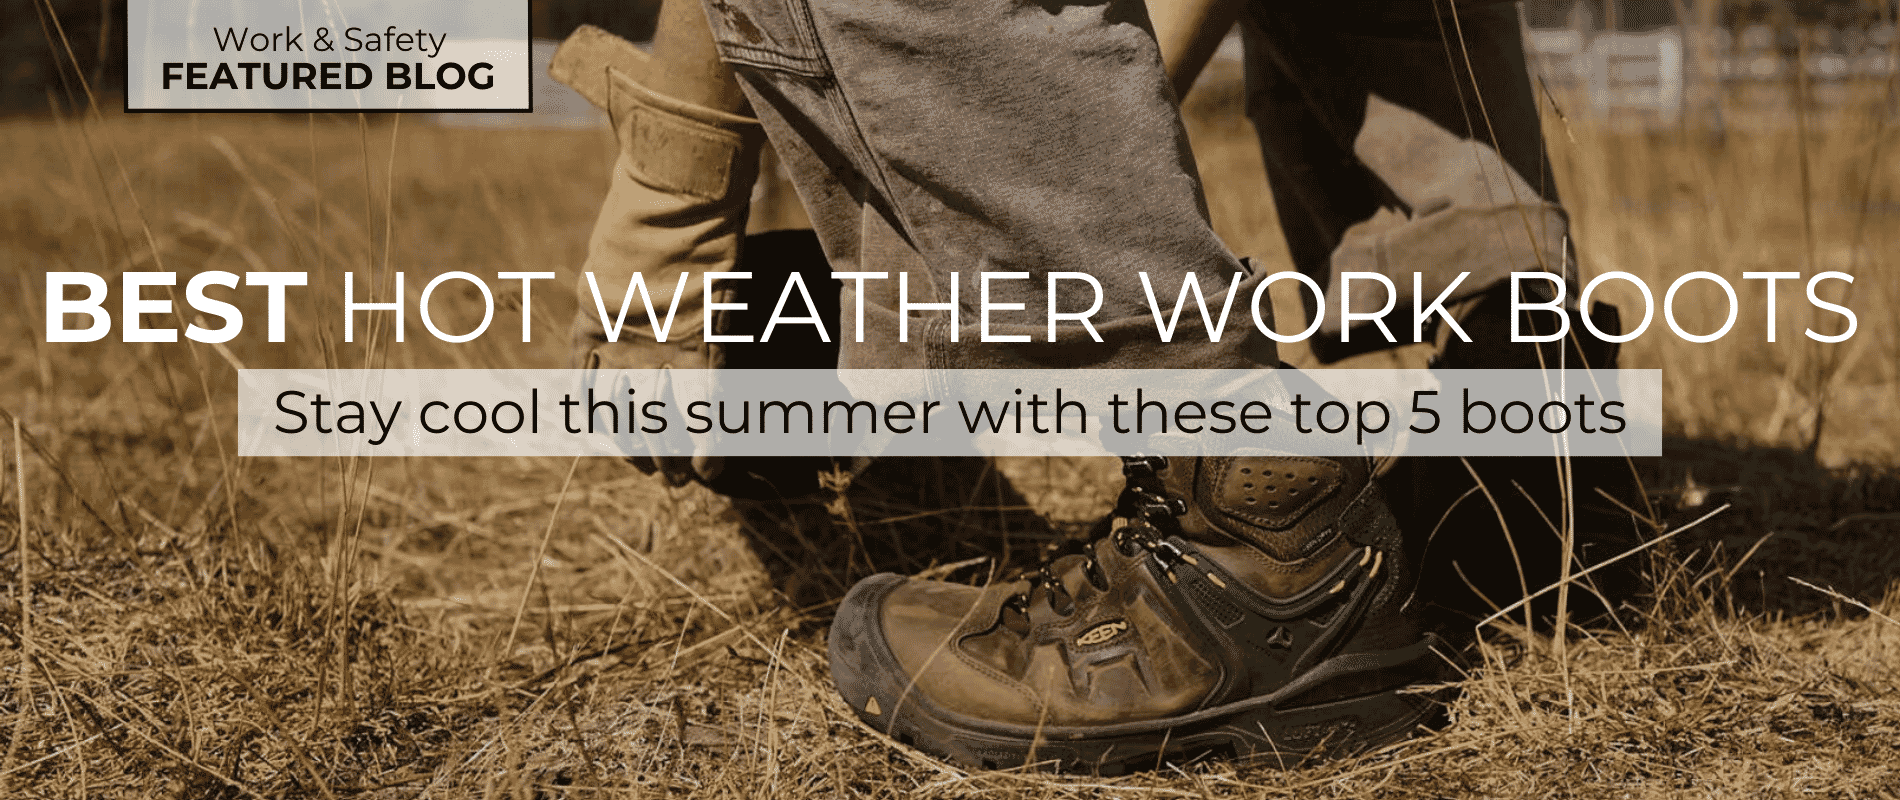 The BEST hot weather work boots. Stay cool this summer with these top 5 boots from Elliott's Boots and Shoes.